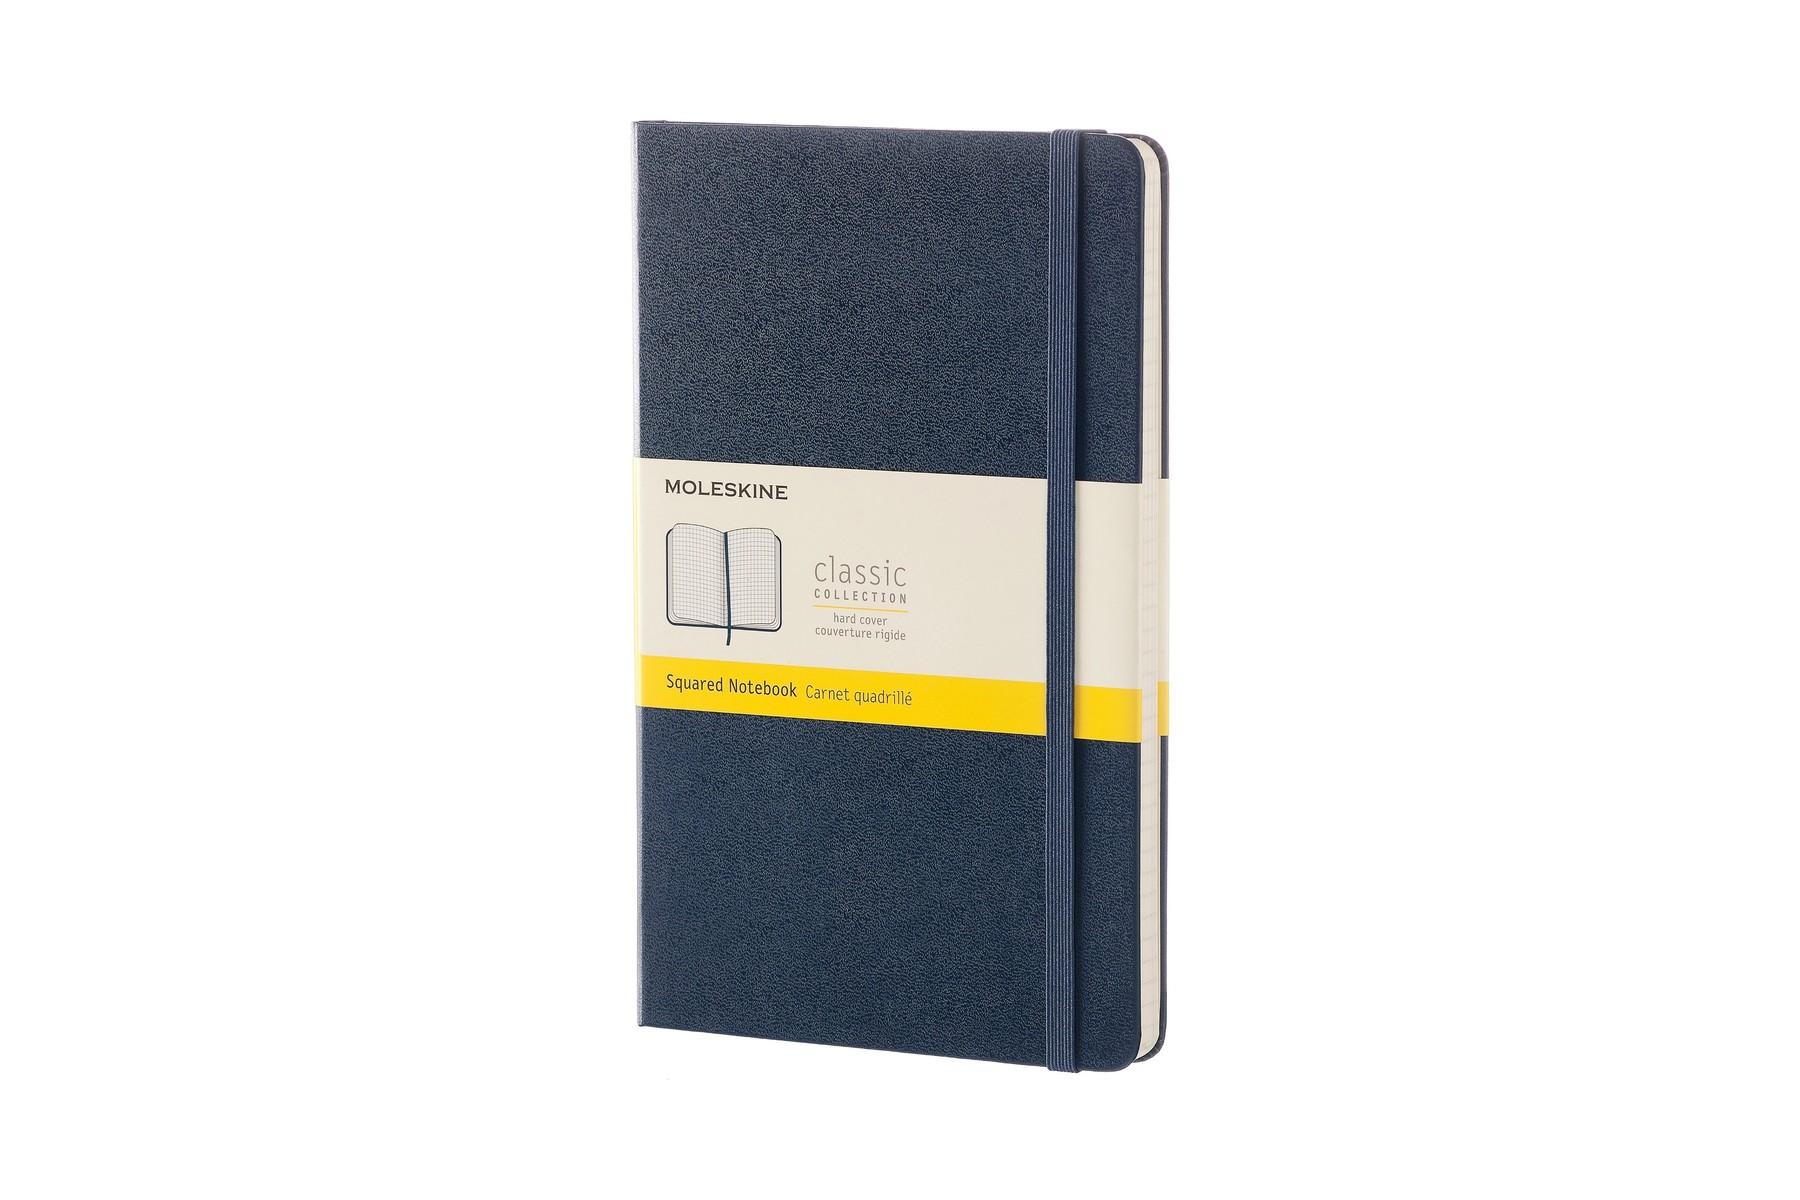 Moleskine Notebook Large Squared, Sapphire Blue, HARD COVER